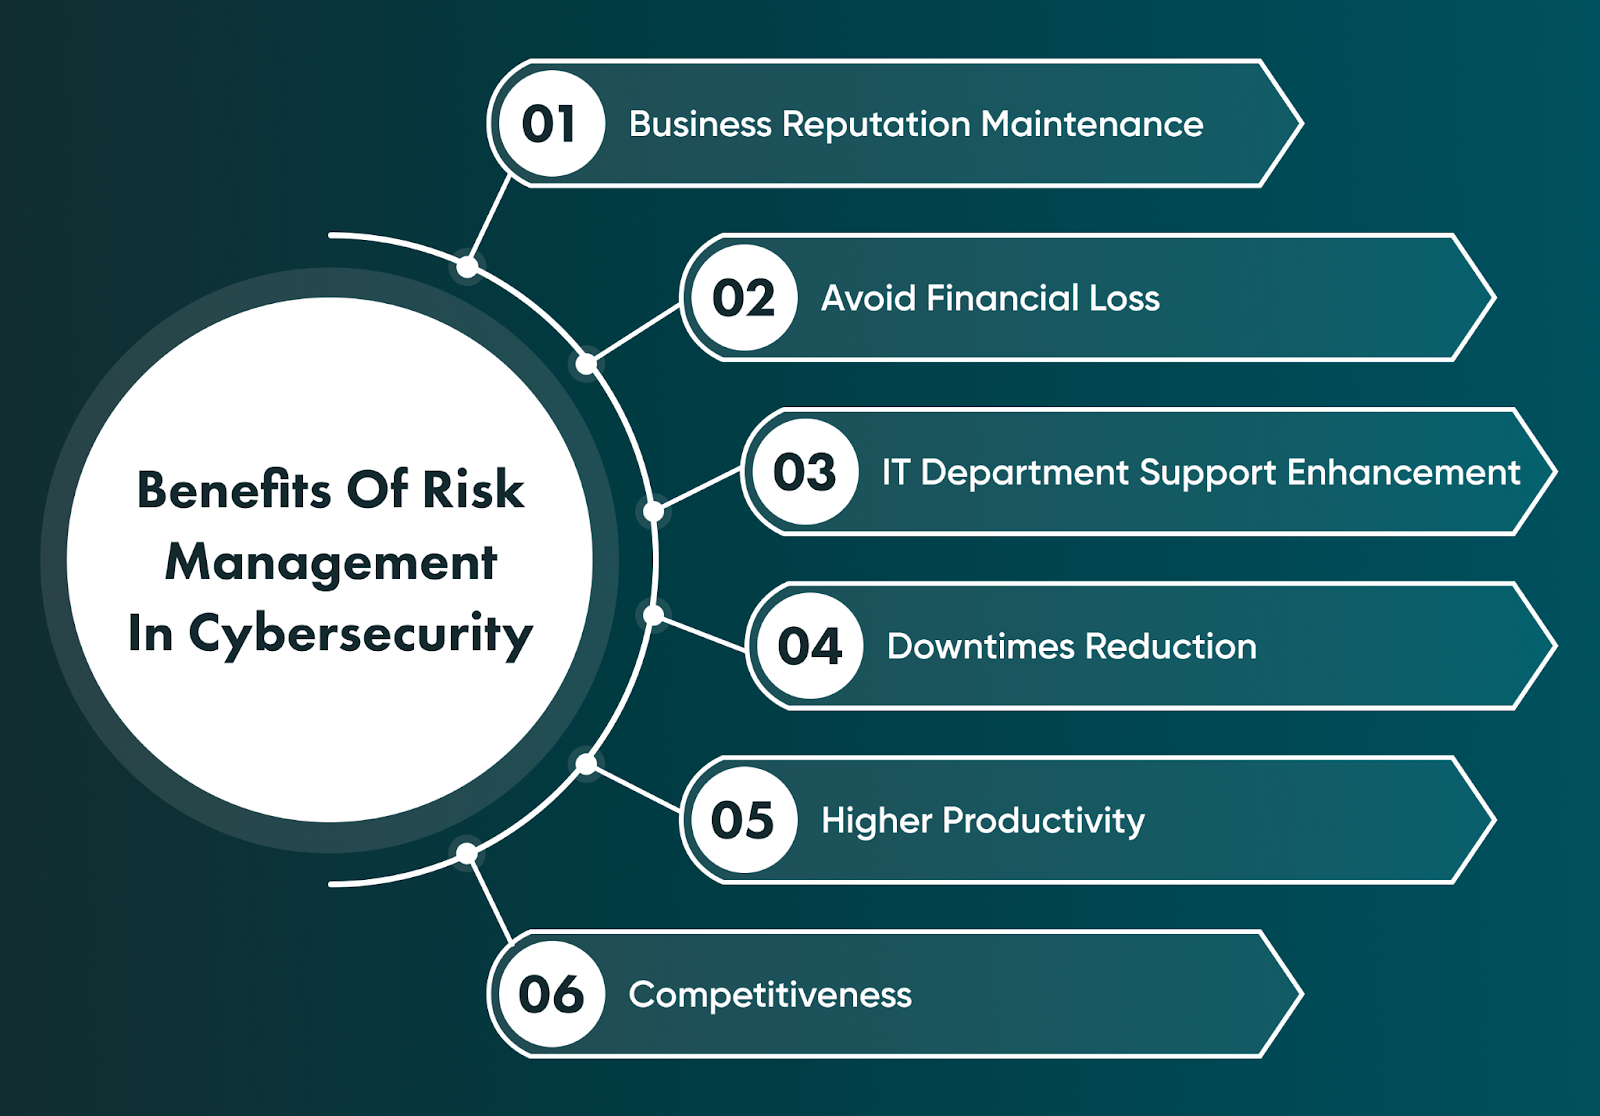 When you plan to start a risk management program in cybersecurity, you should know how you can benefit from it. 